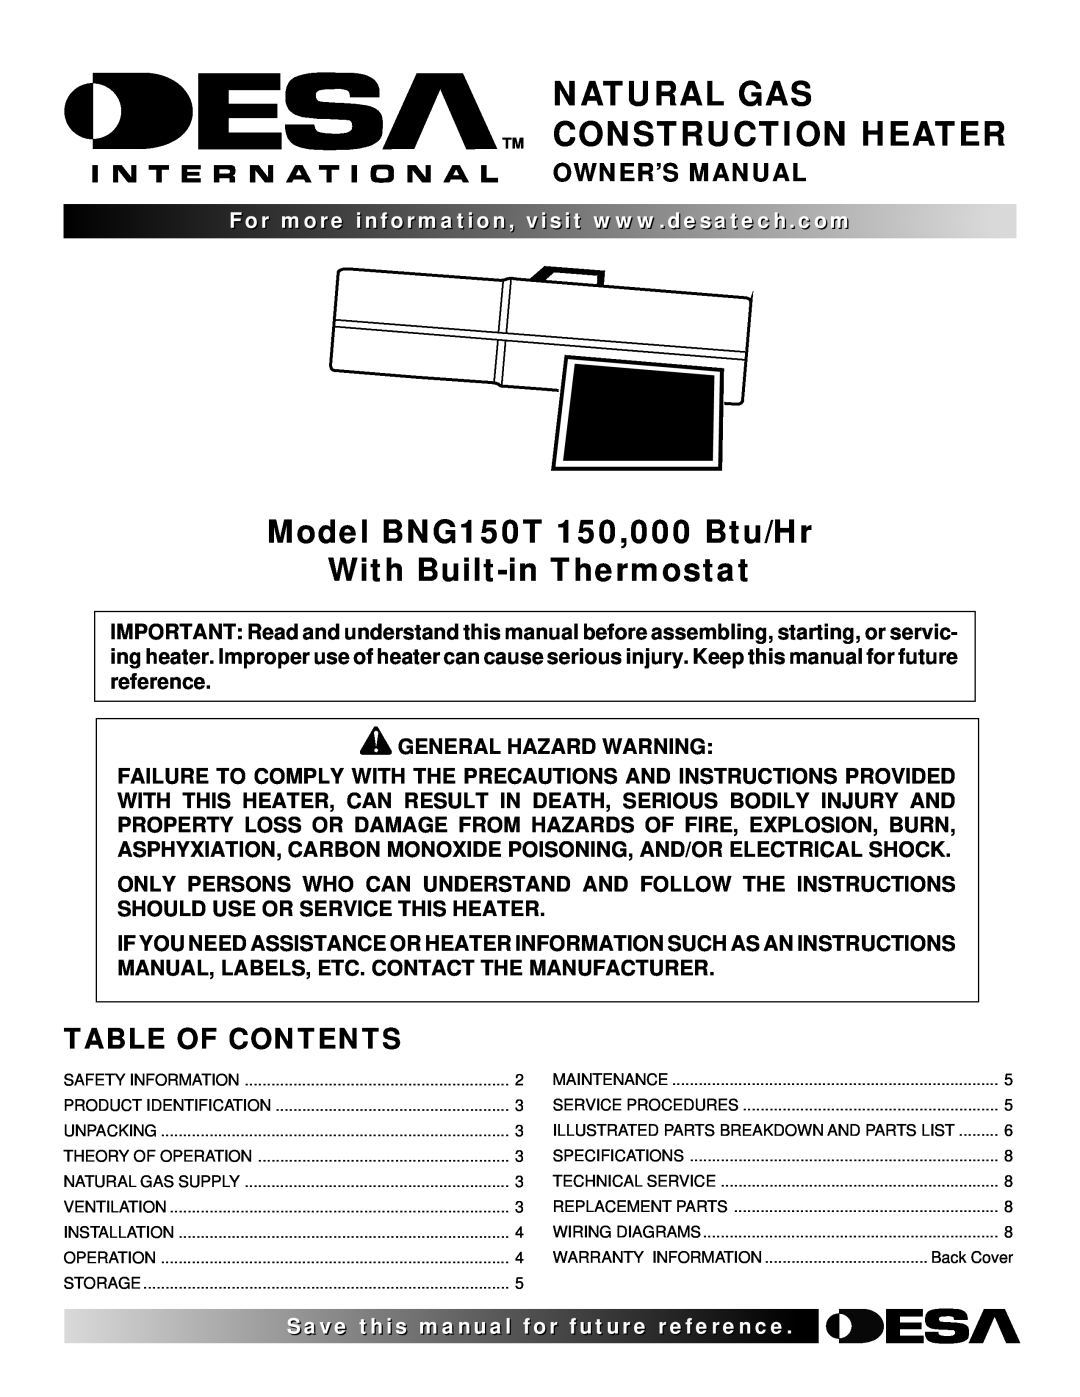 Desa owner manual Model BNG150T 150,000 Btu/Hr, With Built-inThermostat, Table Of Contents 